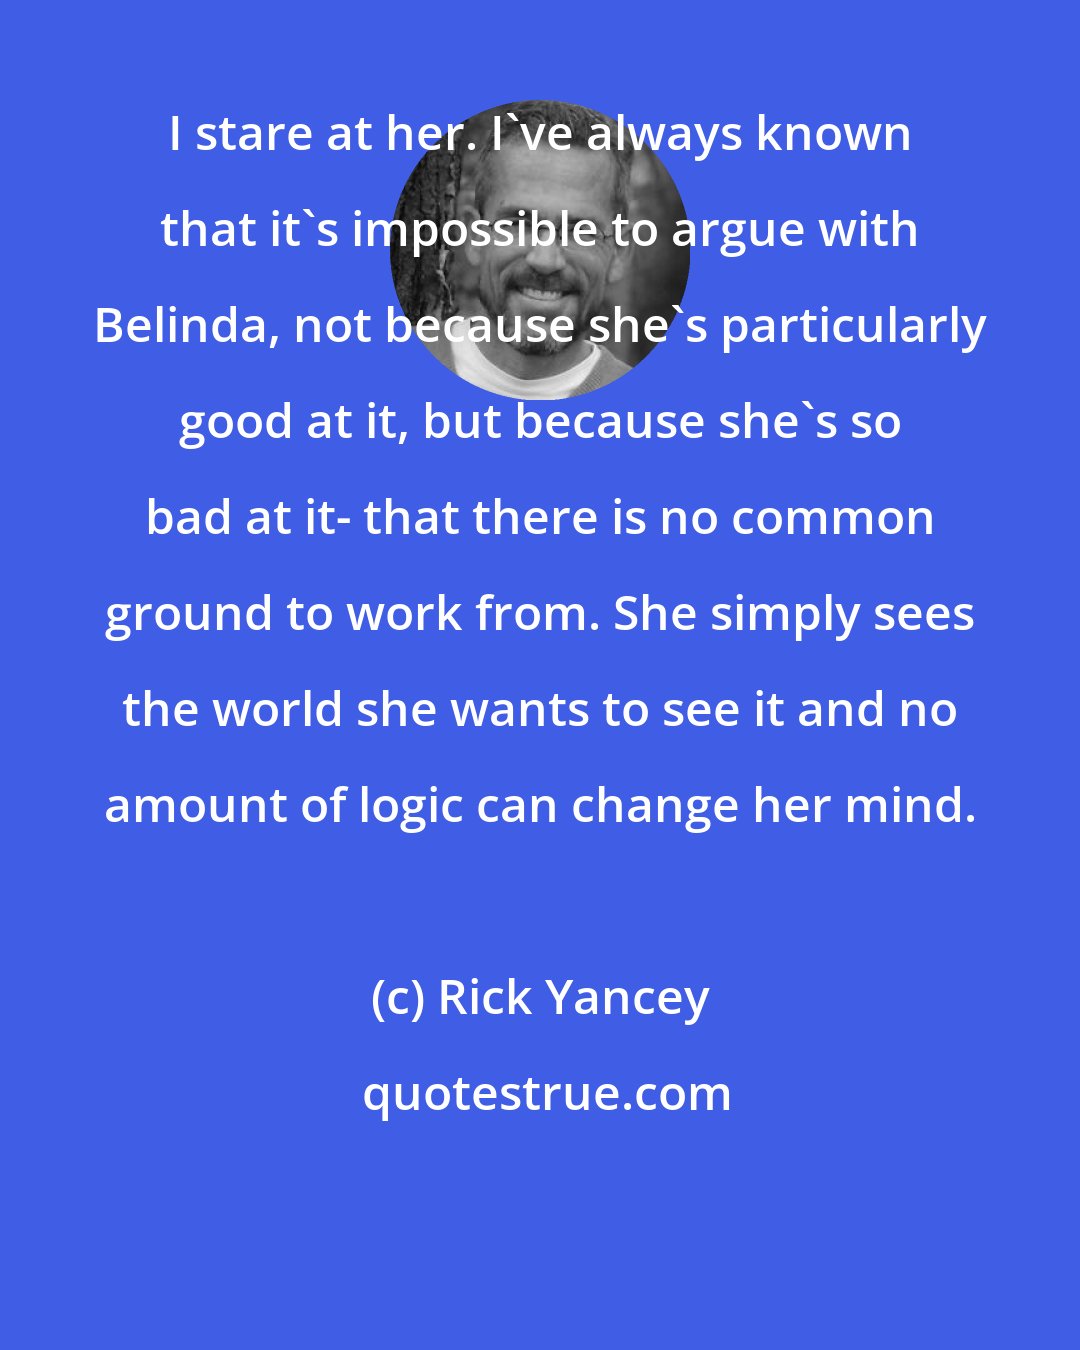 Rick Yancey: I stare at her. I've always known that it's impossible to argue with Belinda, not because she's particularly good at it, but because she's so bad at it- that there is no common ground to work from. She simply sees the world she wants to see it and no amount of logic can change her mind.